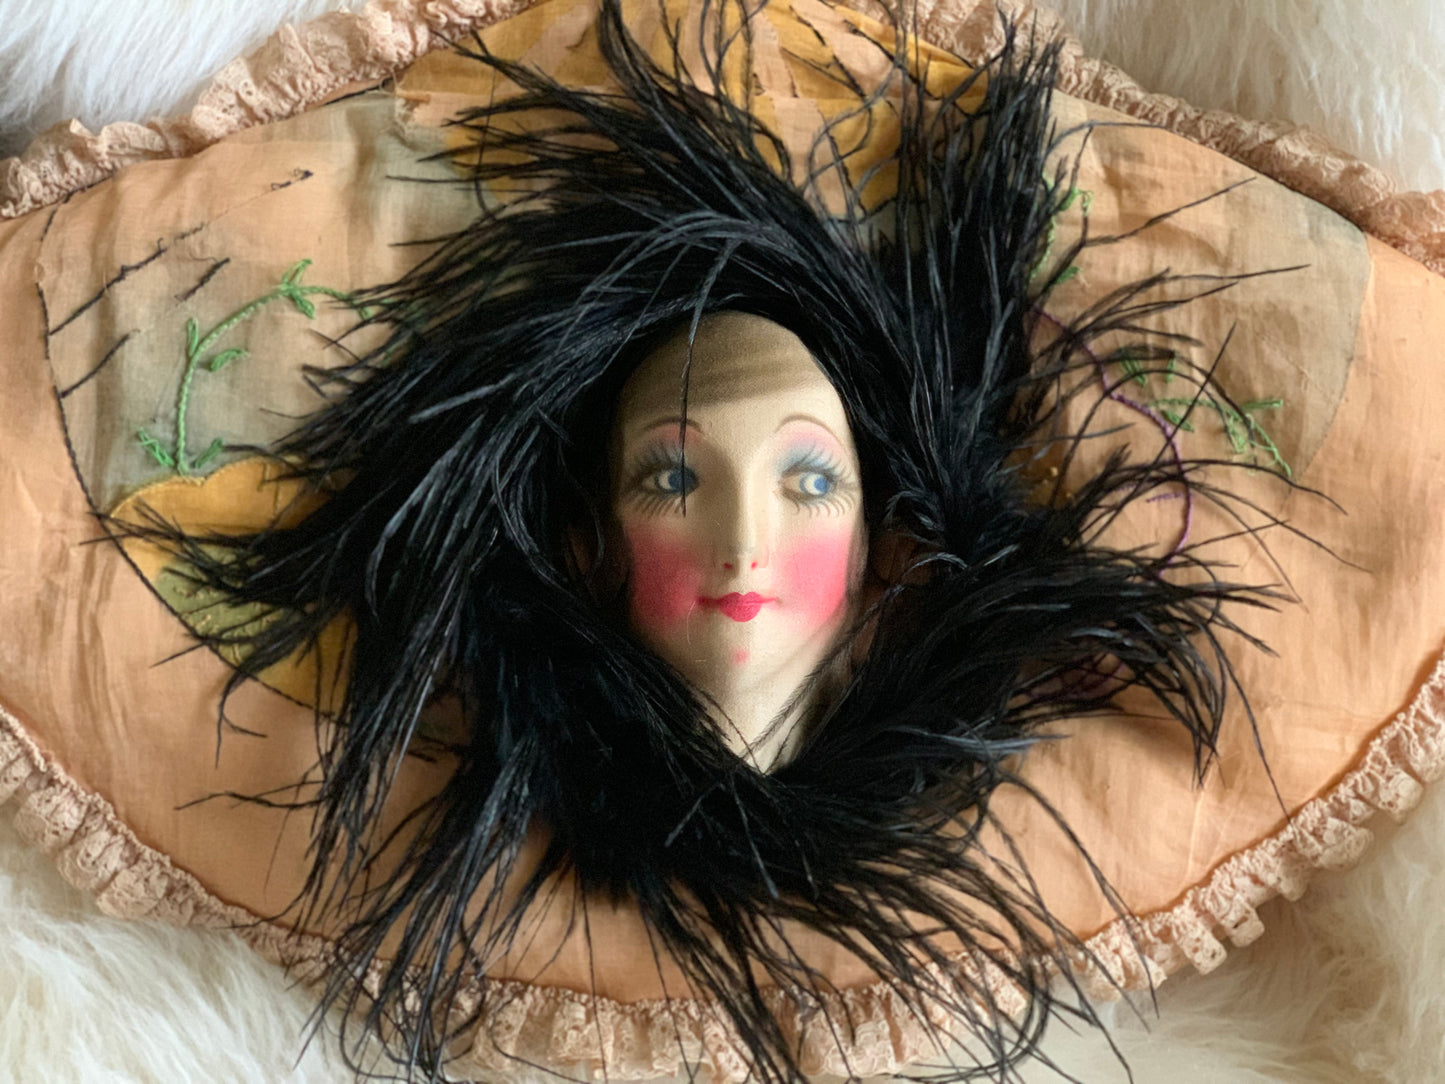 Assembled shabby vintage doll face pillow